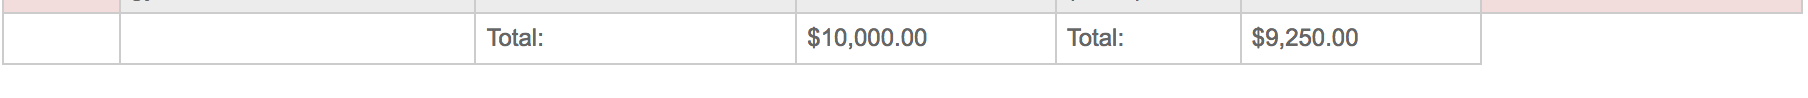 pending payout.png